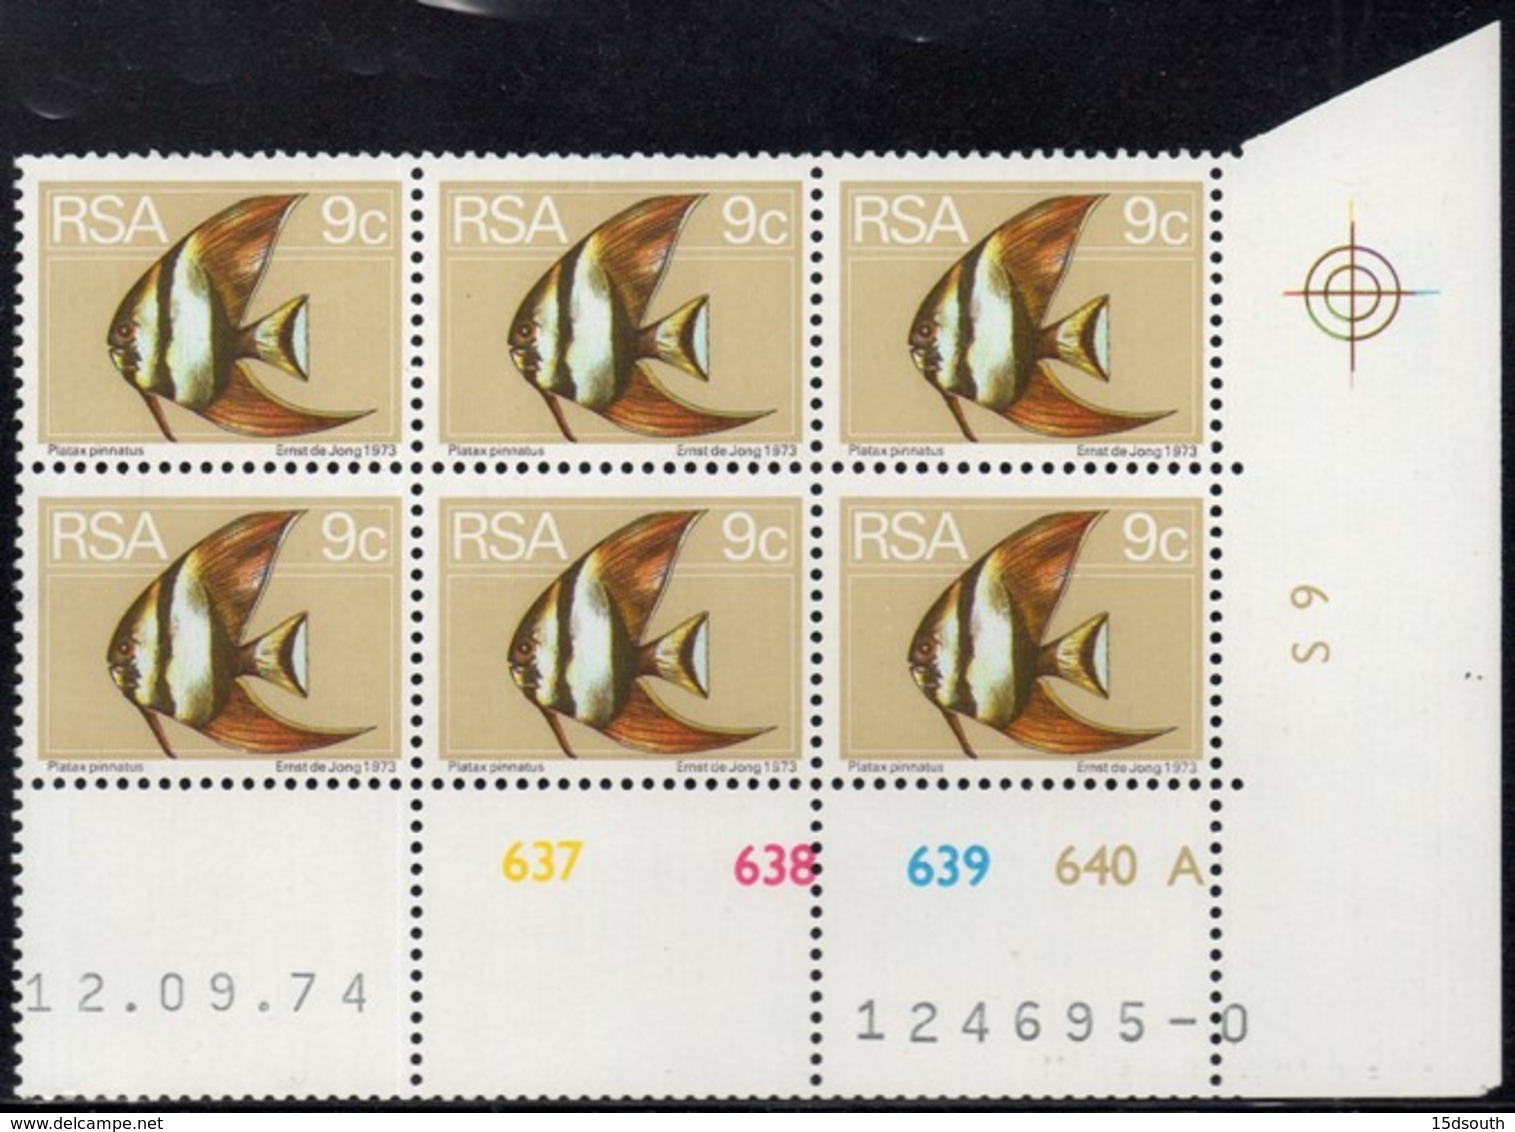 South Africa - 1974 2nd Definitive 9c Angel Fish Control Block (1974.09.12) Pane A (**) # SG 355 - Hojas Bloque